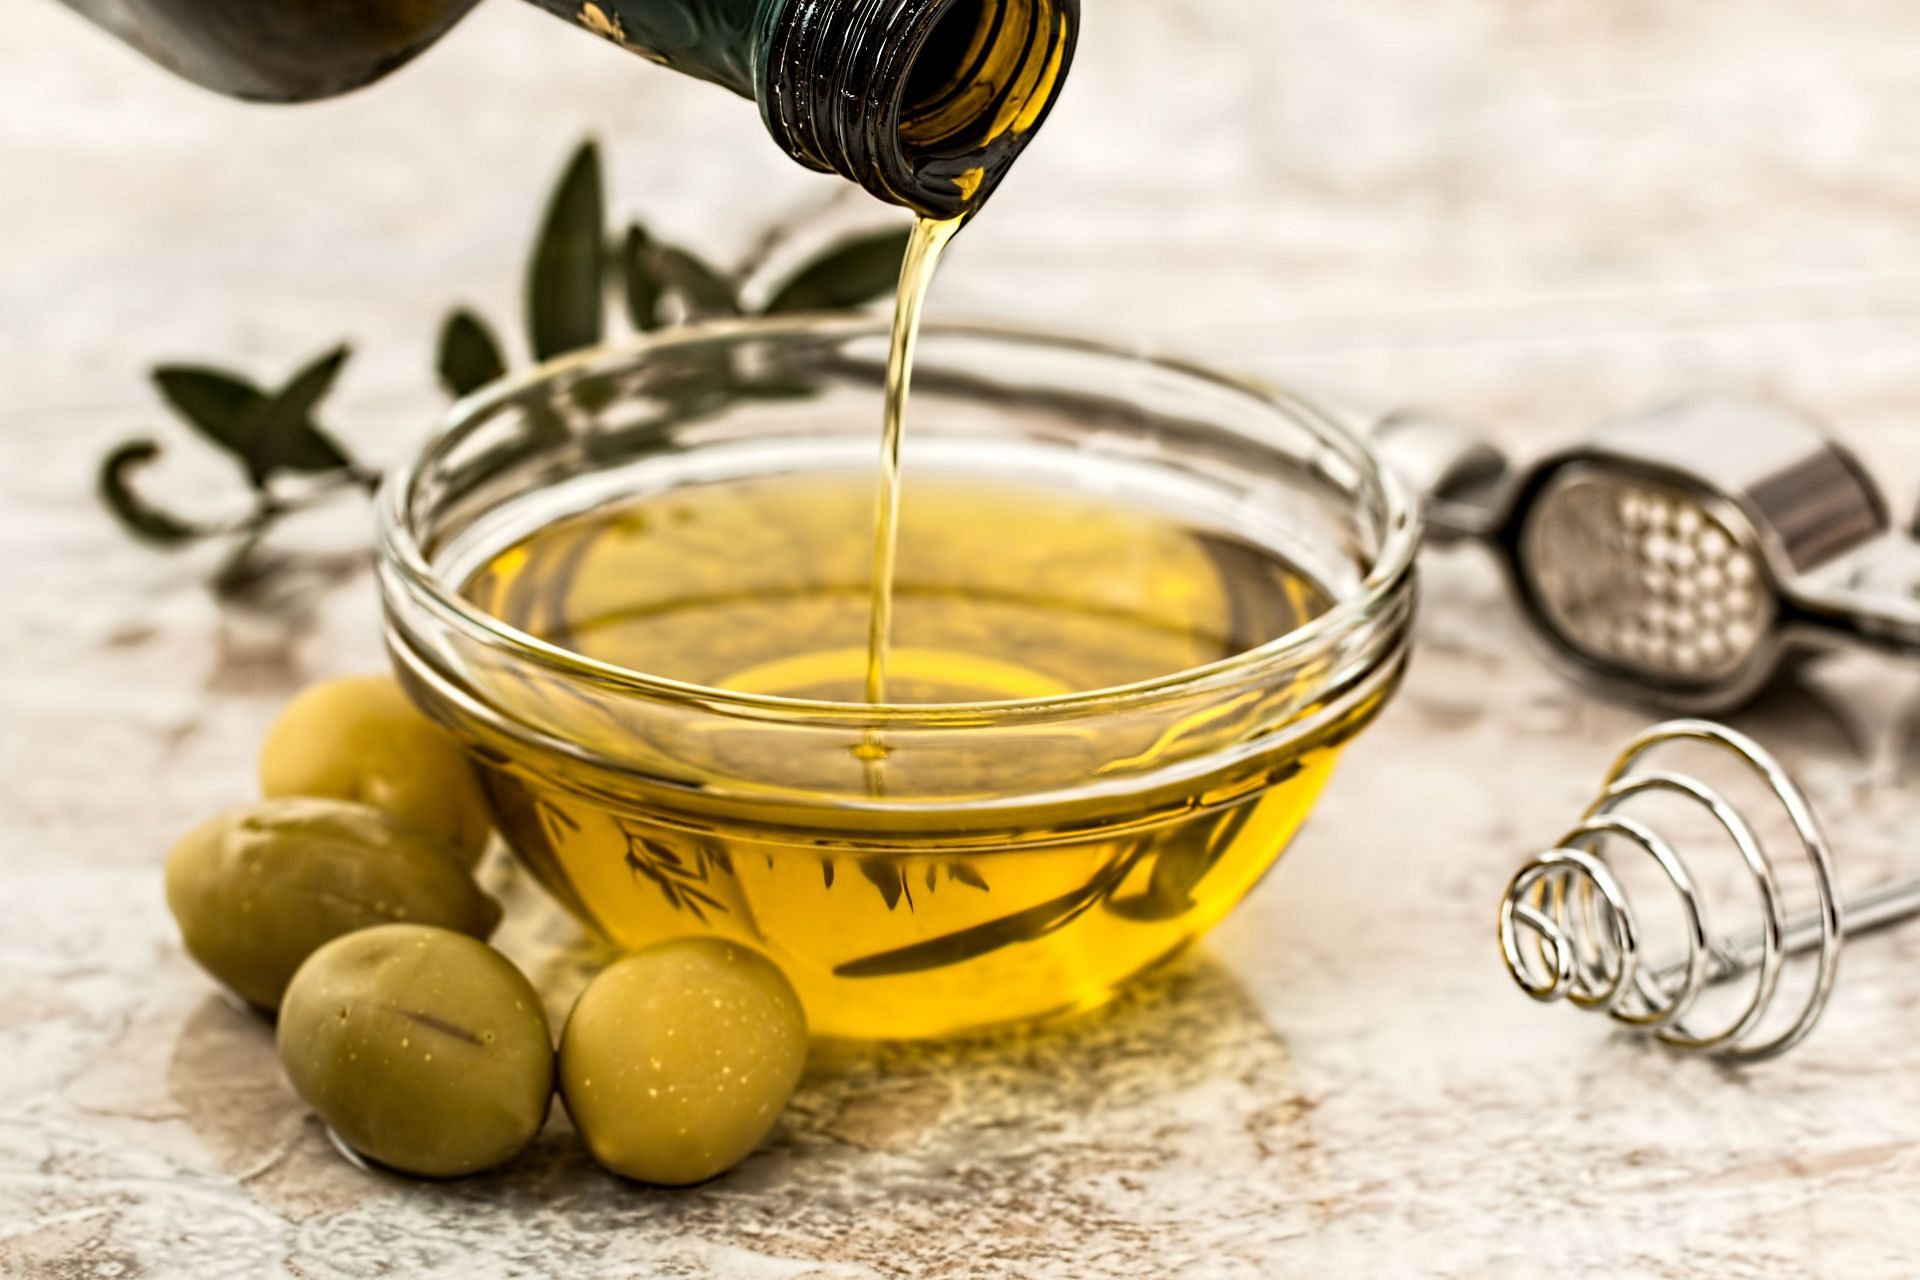 Olive oil is one of the healthiest oils in the world (Image by Pixabay)